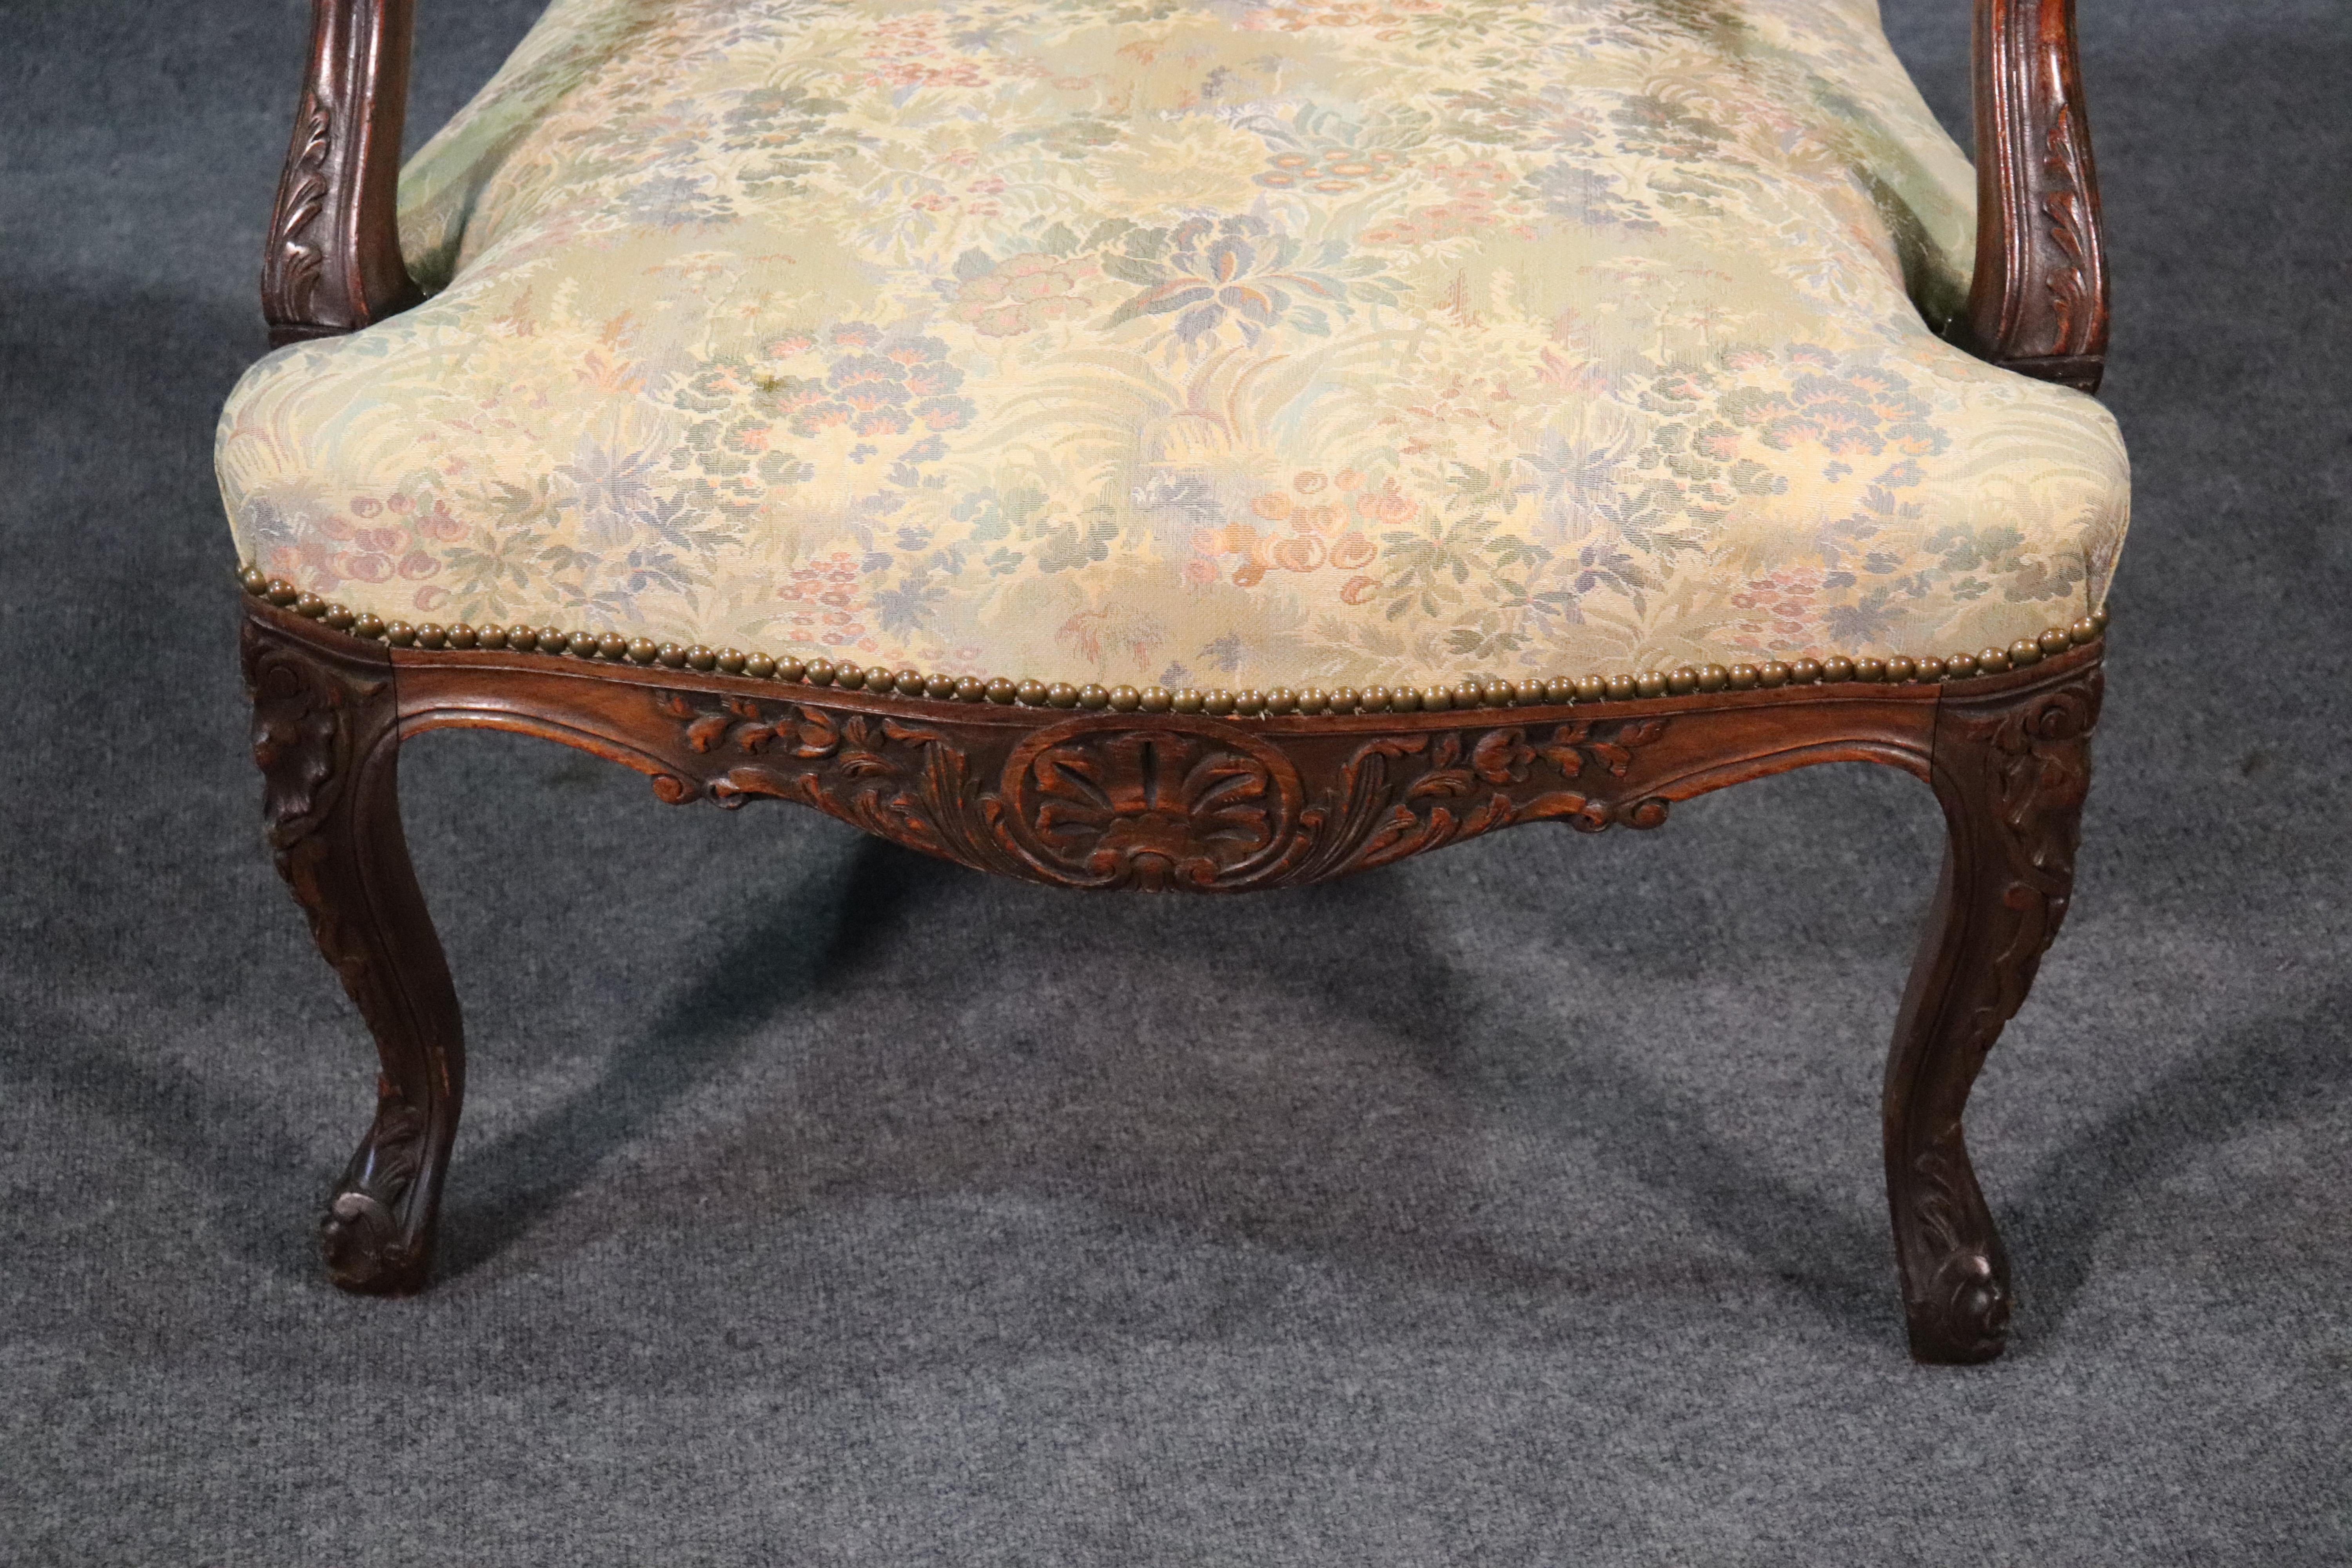 Carved English Walnut Georgian Armchair with Tapestry Upholstery and Nailheads In Good Condition For Sale In Swedesboro, NJ